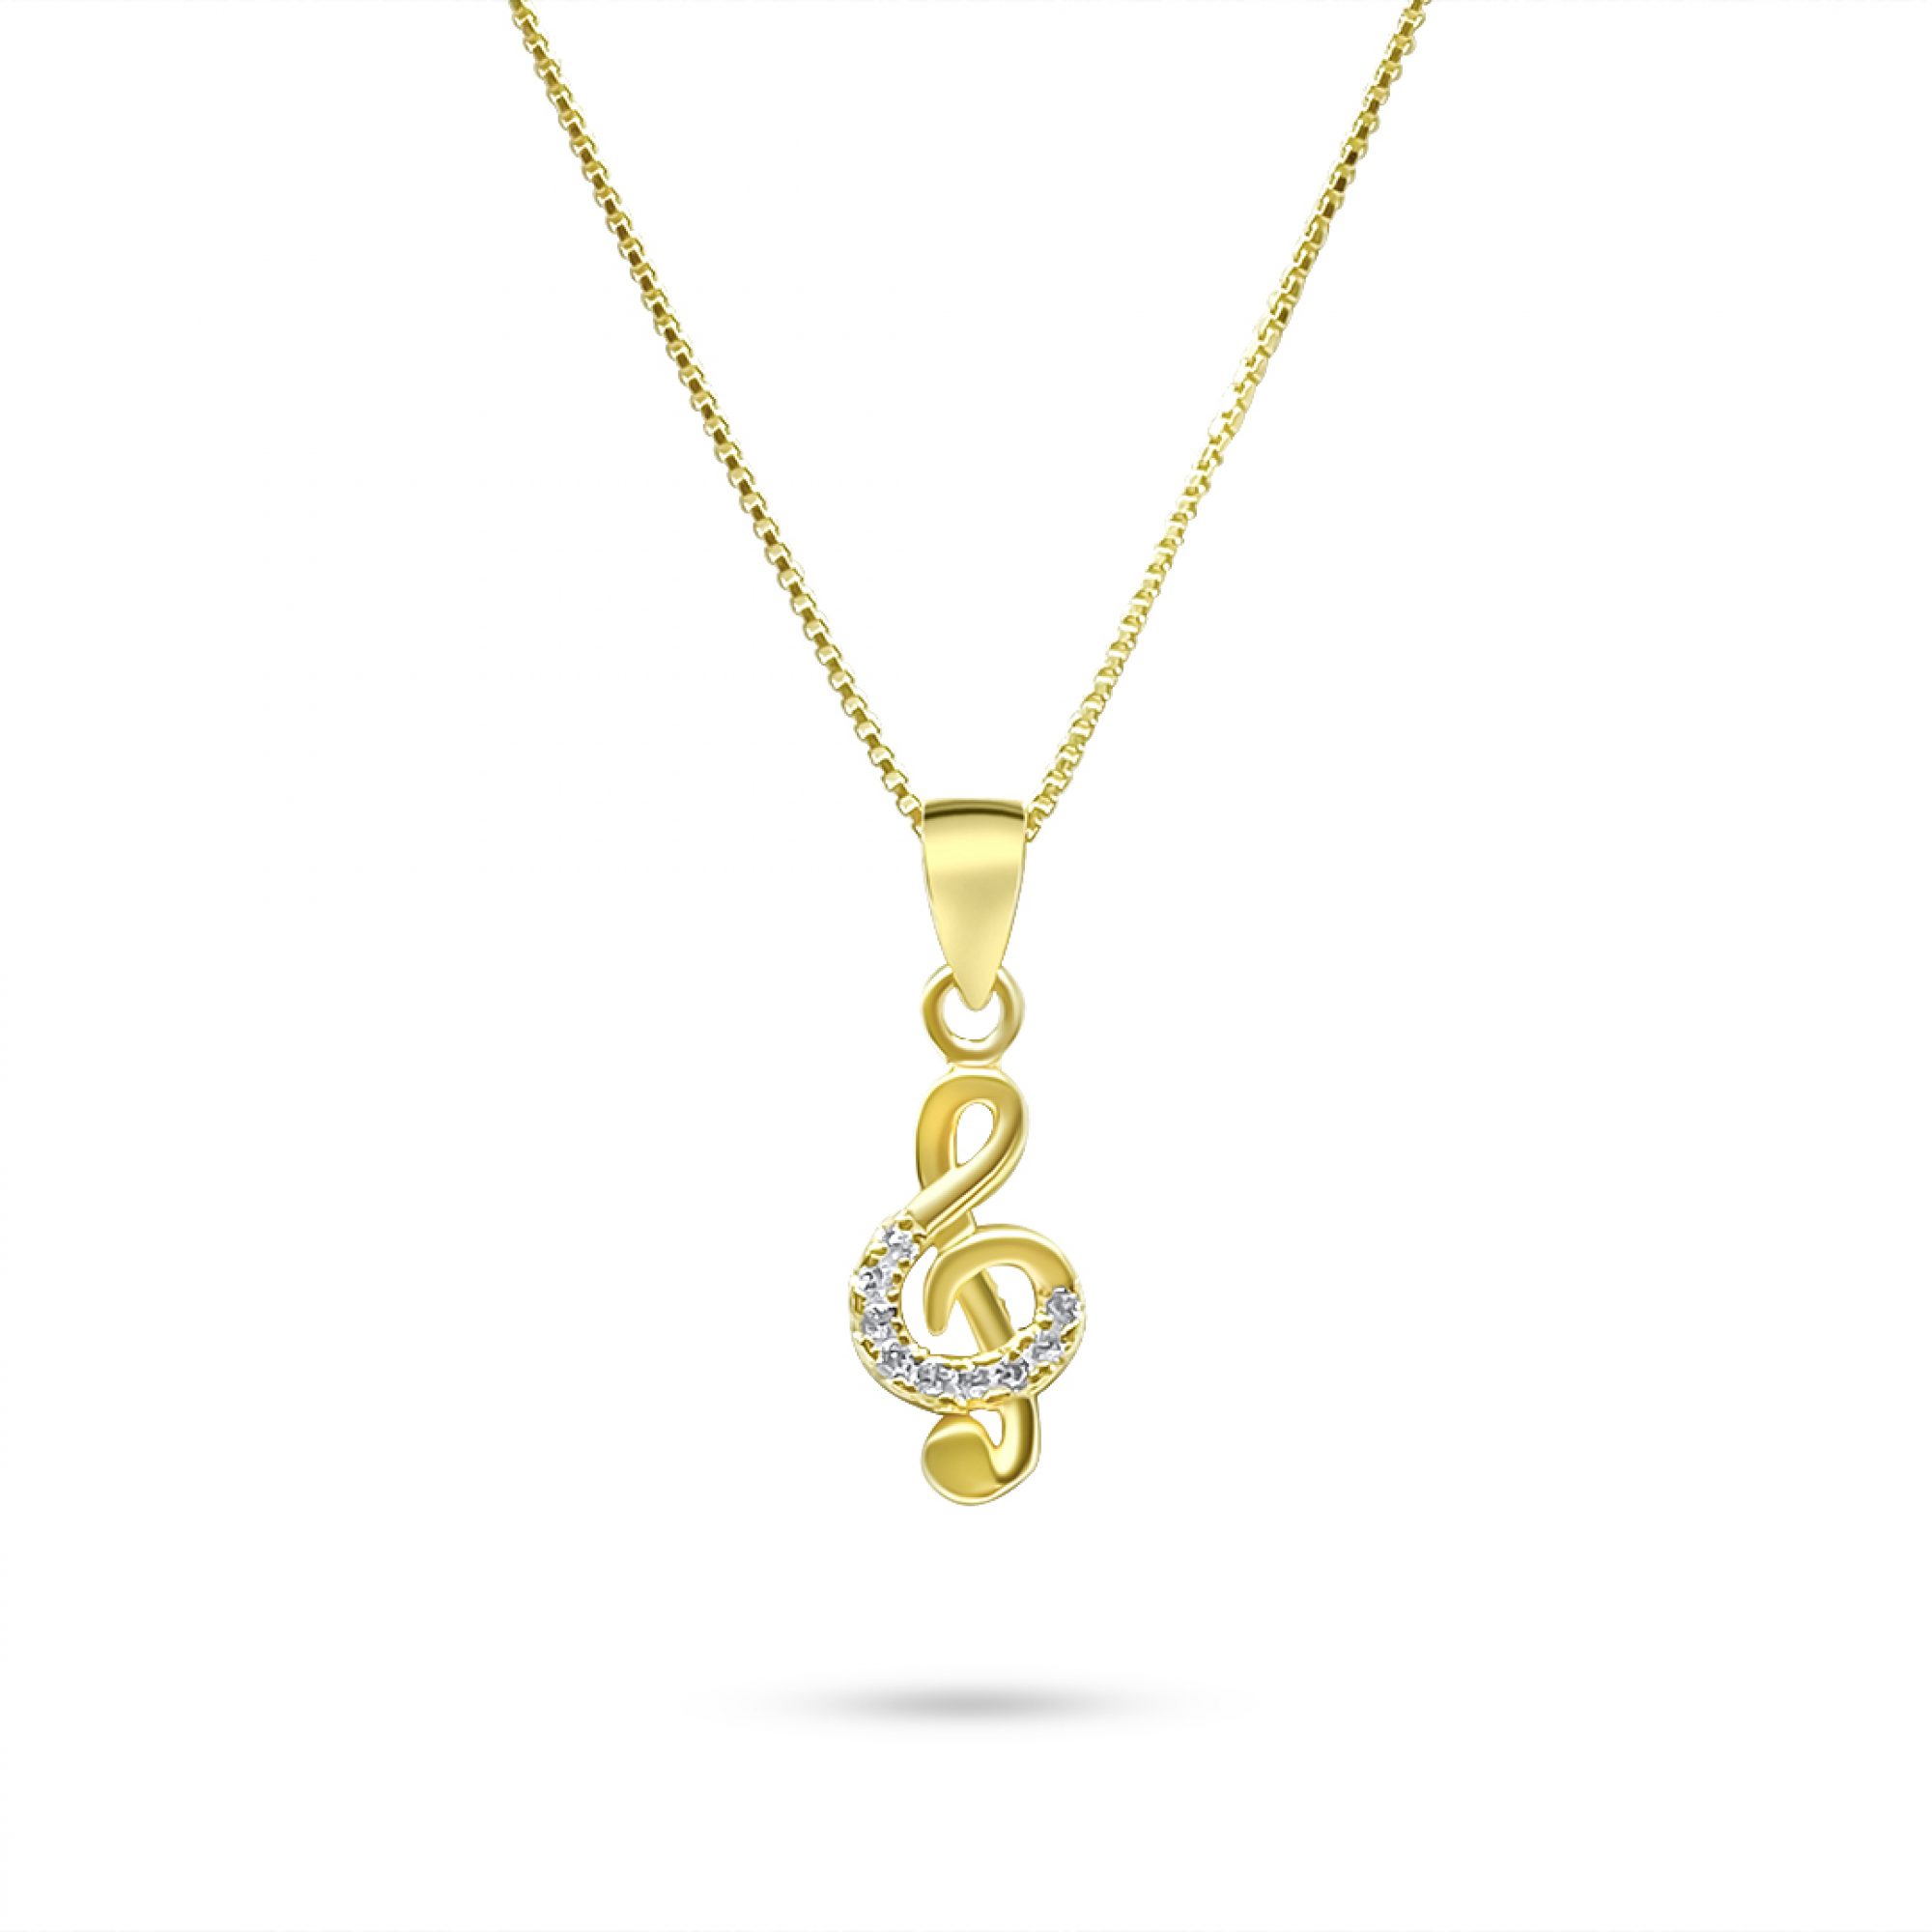 Gold plated treble clef necklace with zircon stones